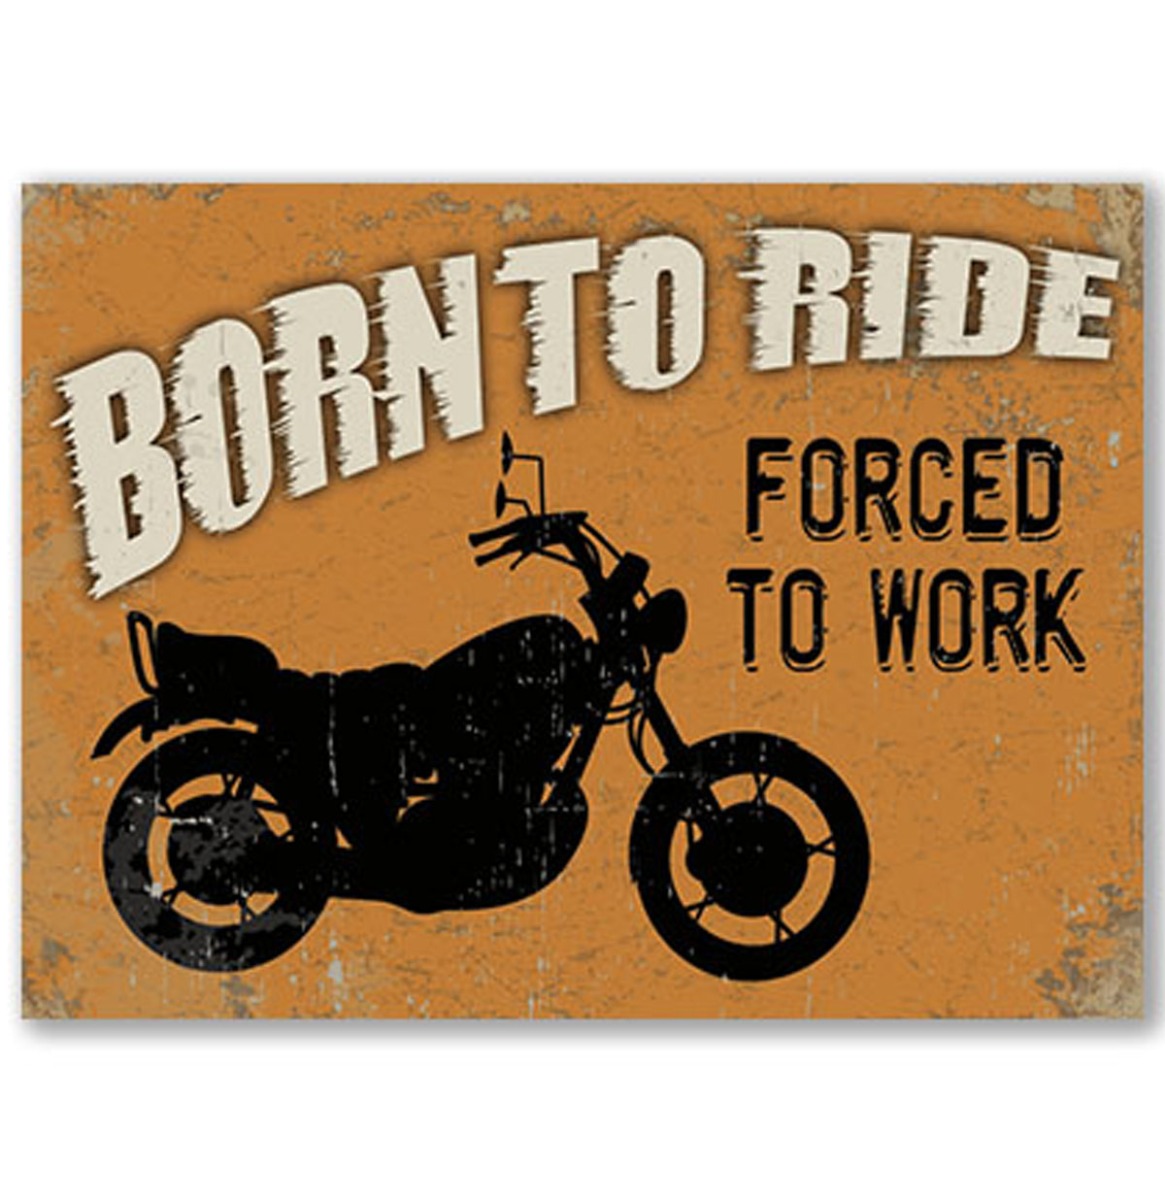 Born To Ride Forced To Work - Metalen Bord Met Reliëf - 43 x 31 cm